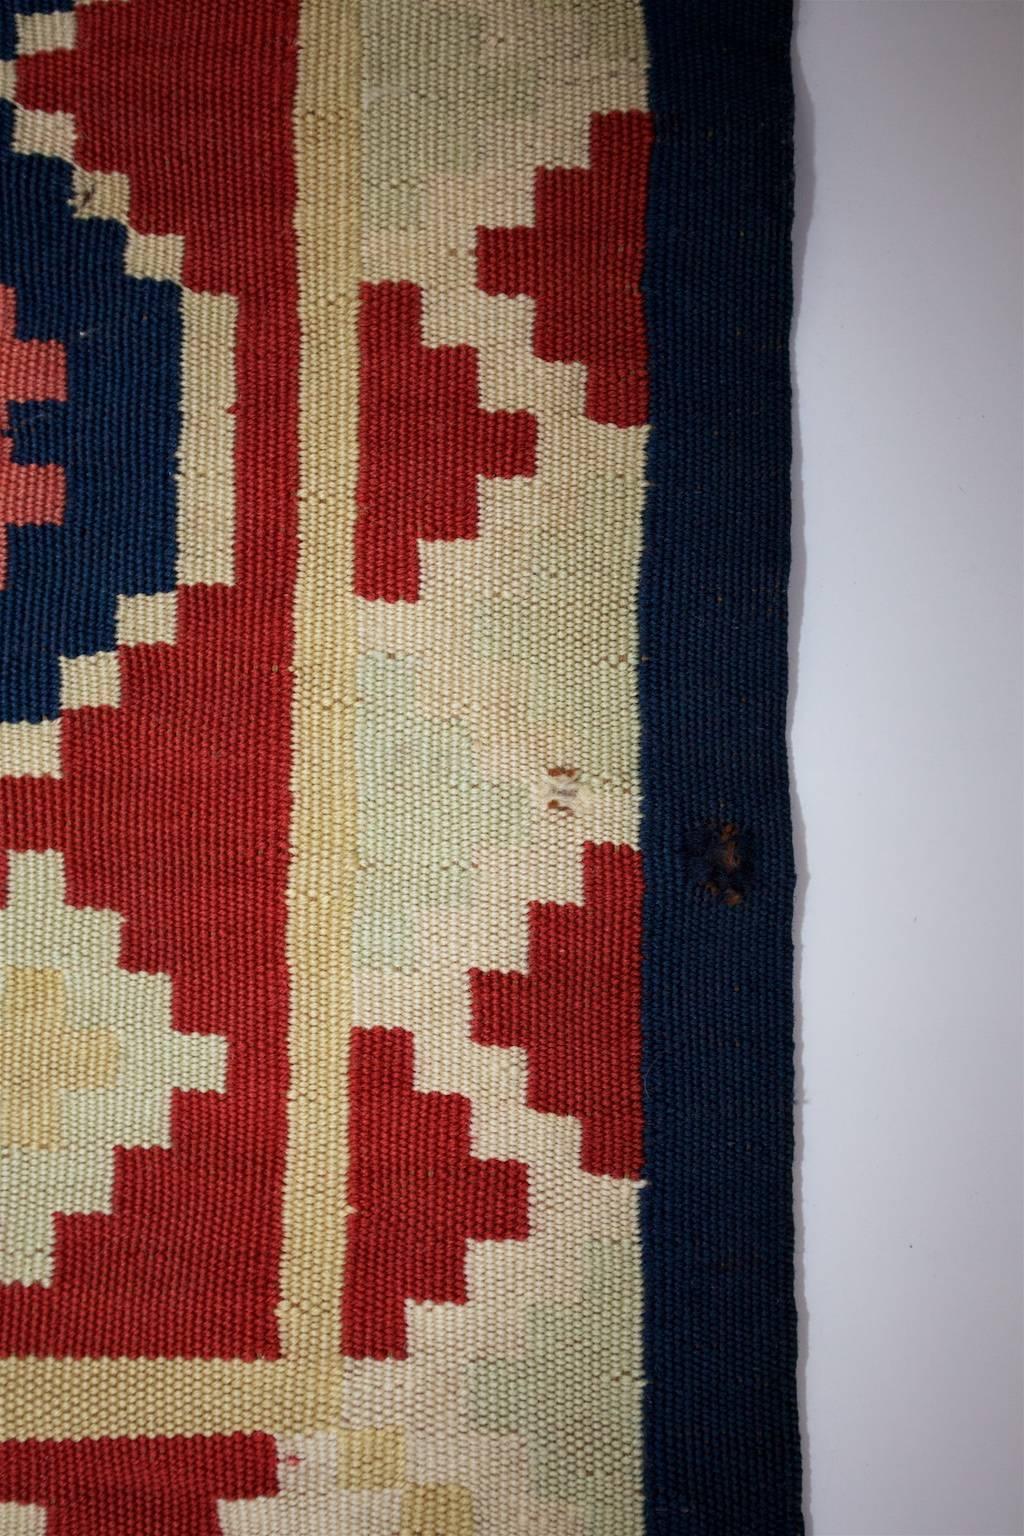 Wool Swedish Seat or Pillow Cover 19th-20th Century, Röllakan Technique For Sale